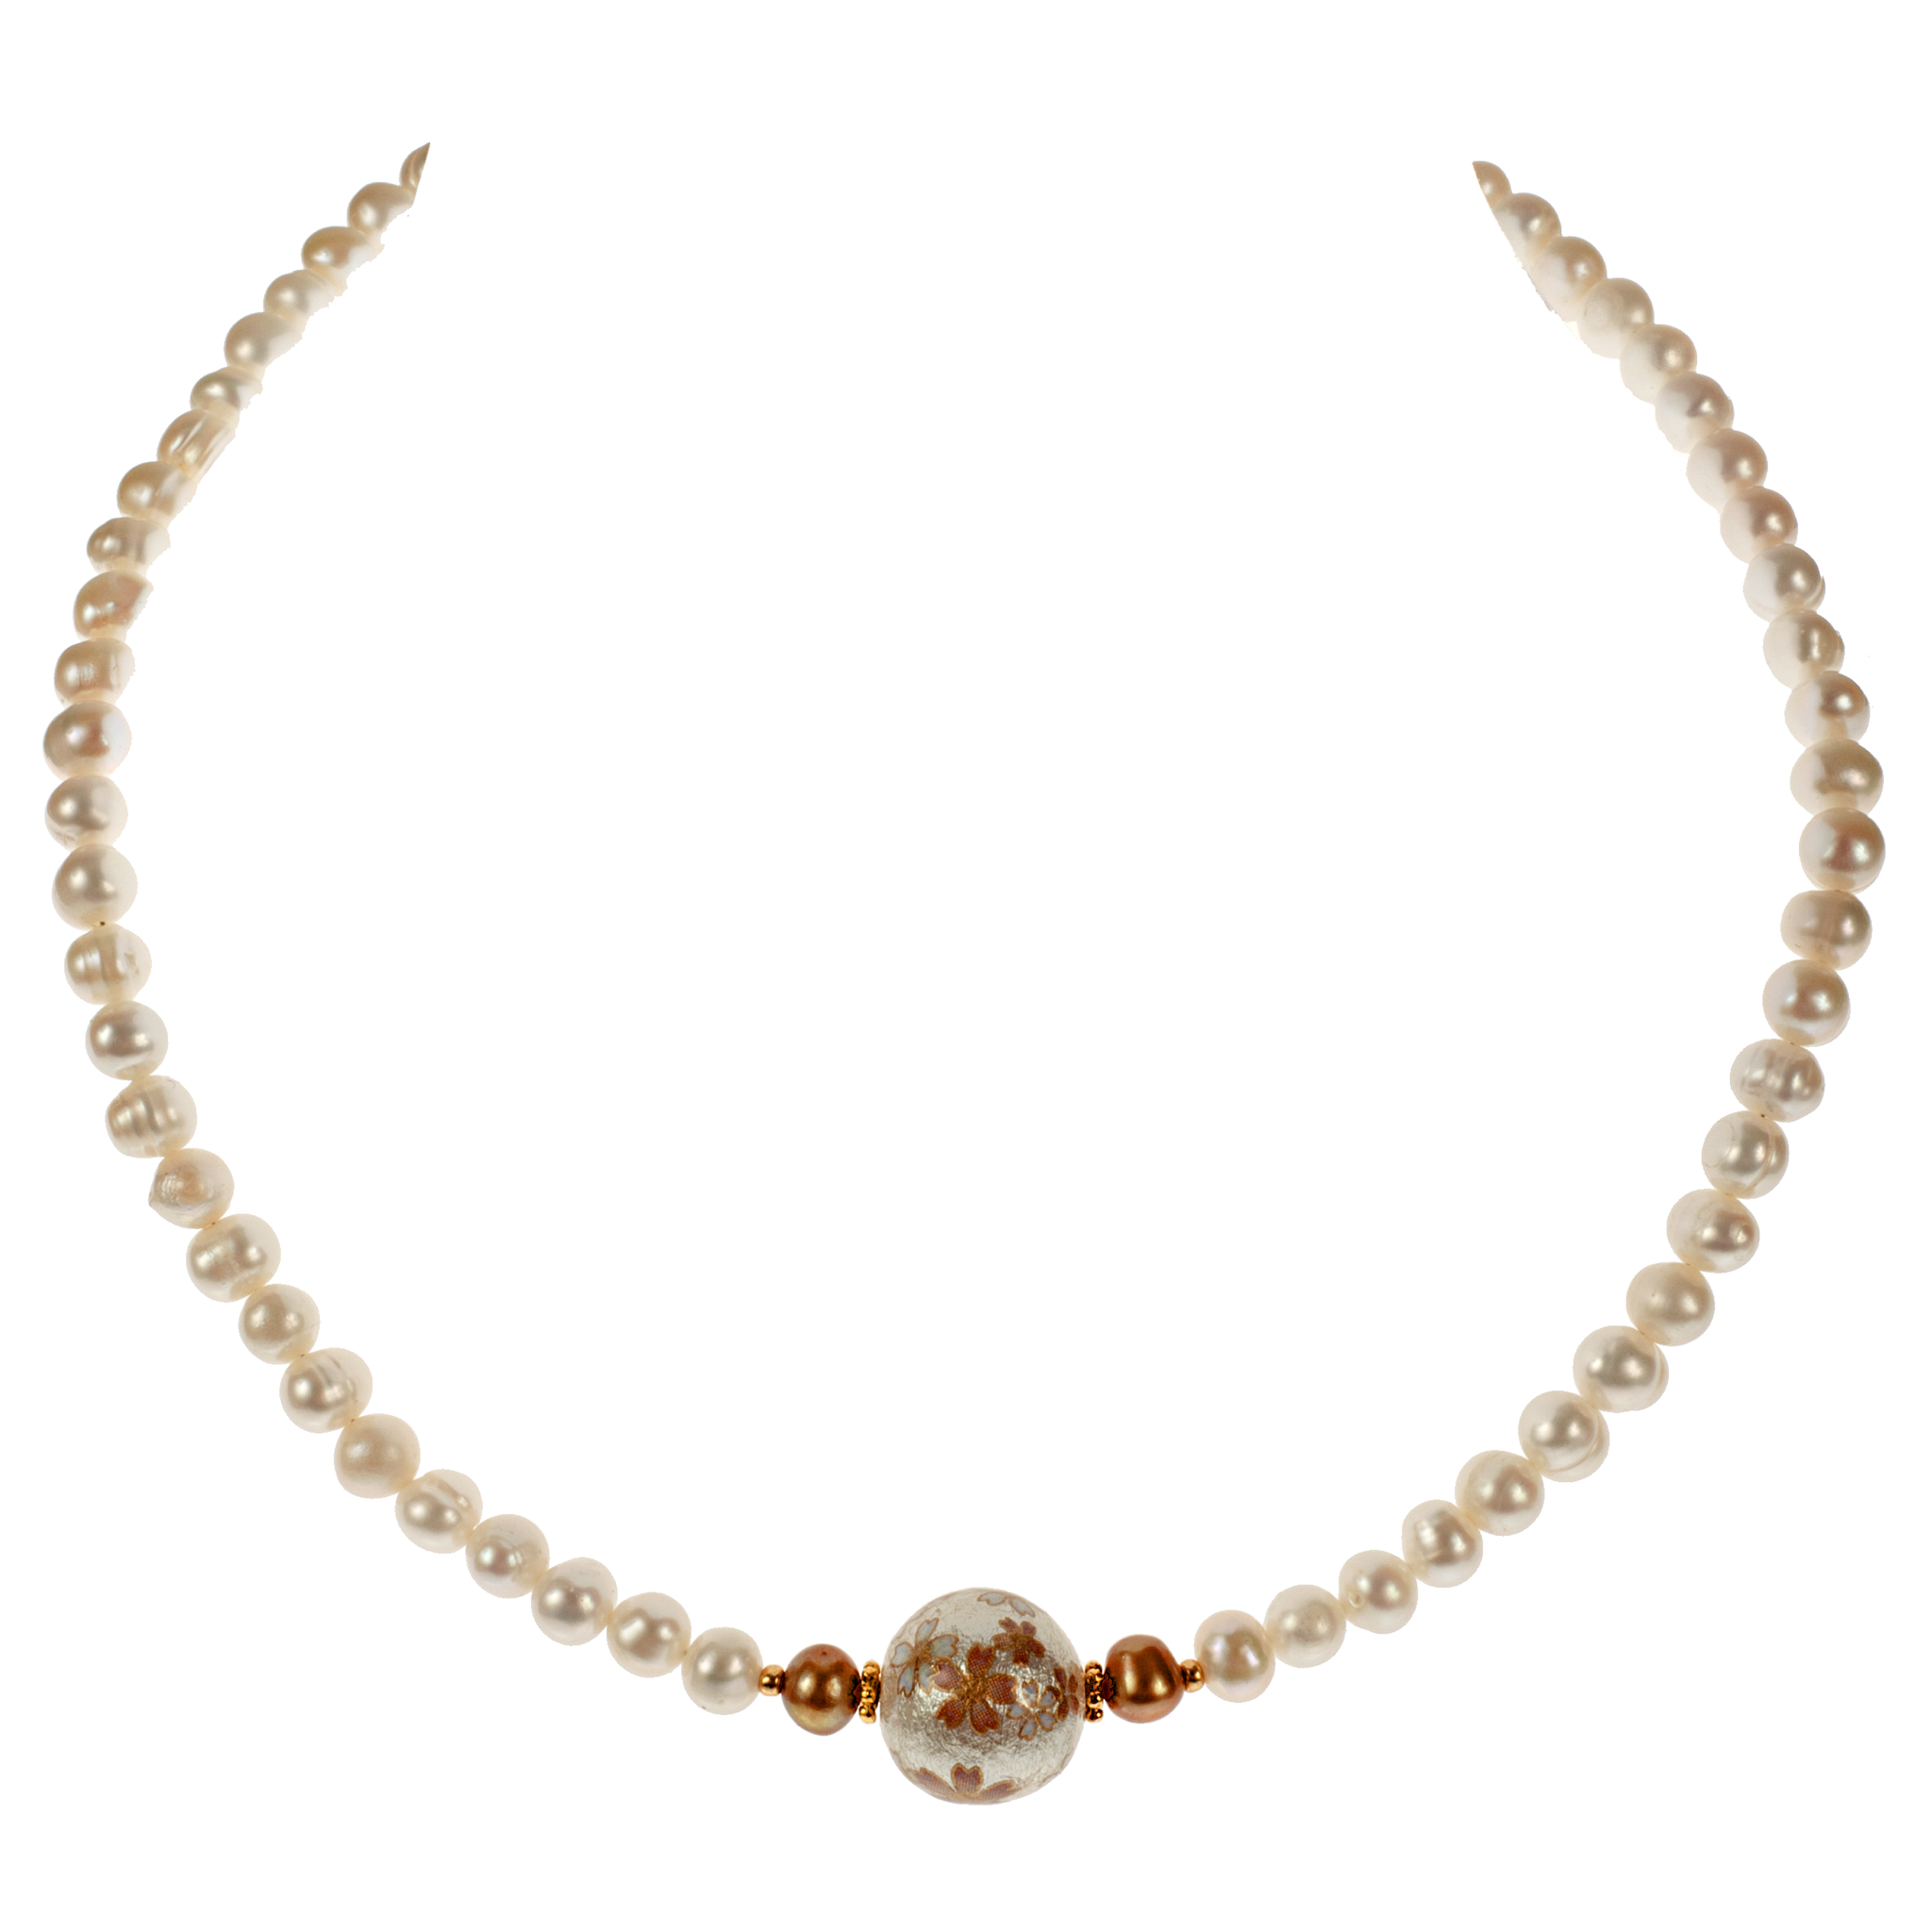 Japanese Cream Floral Tensha & Cultured Pearl Necklace